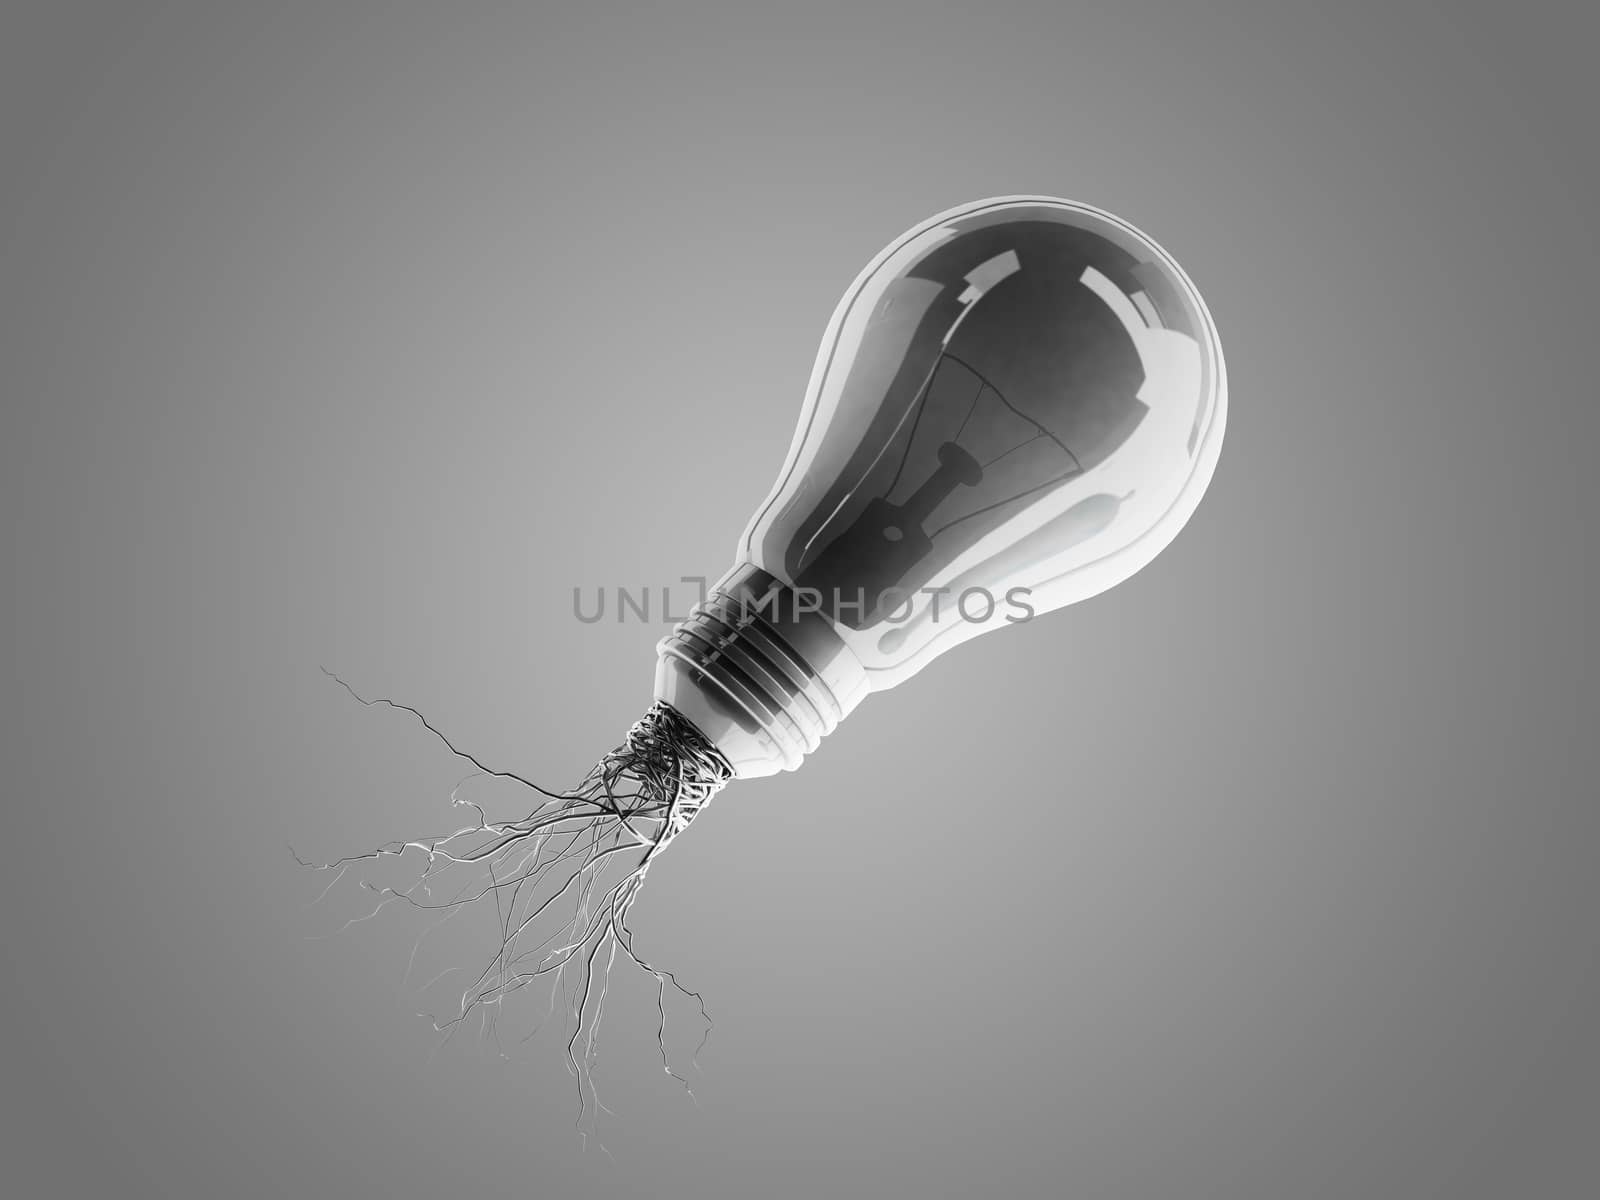 Light bulb with roots and emerged on the icon with roots, concept